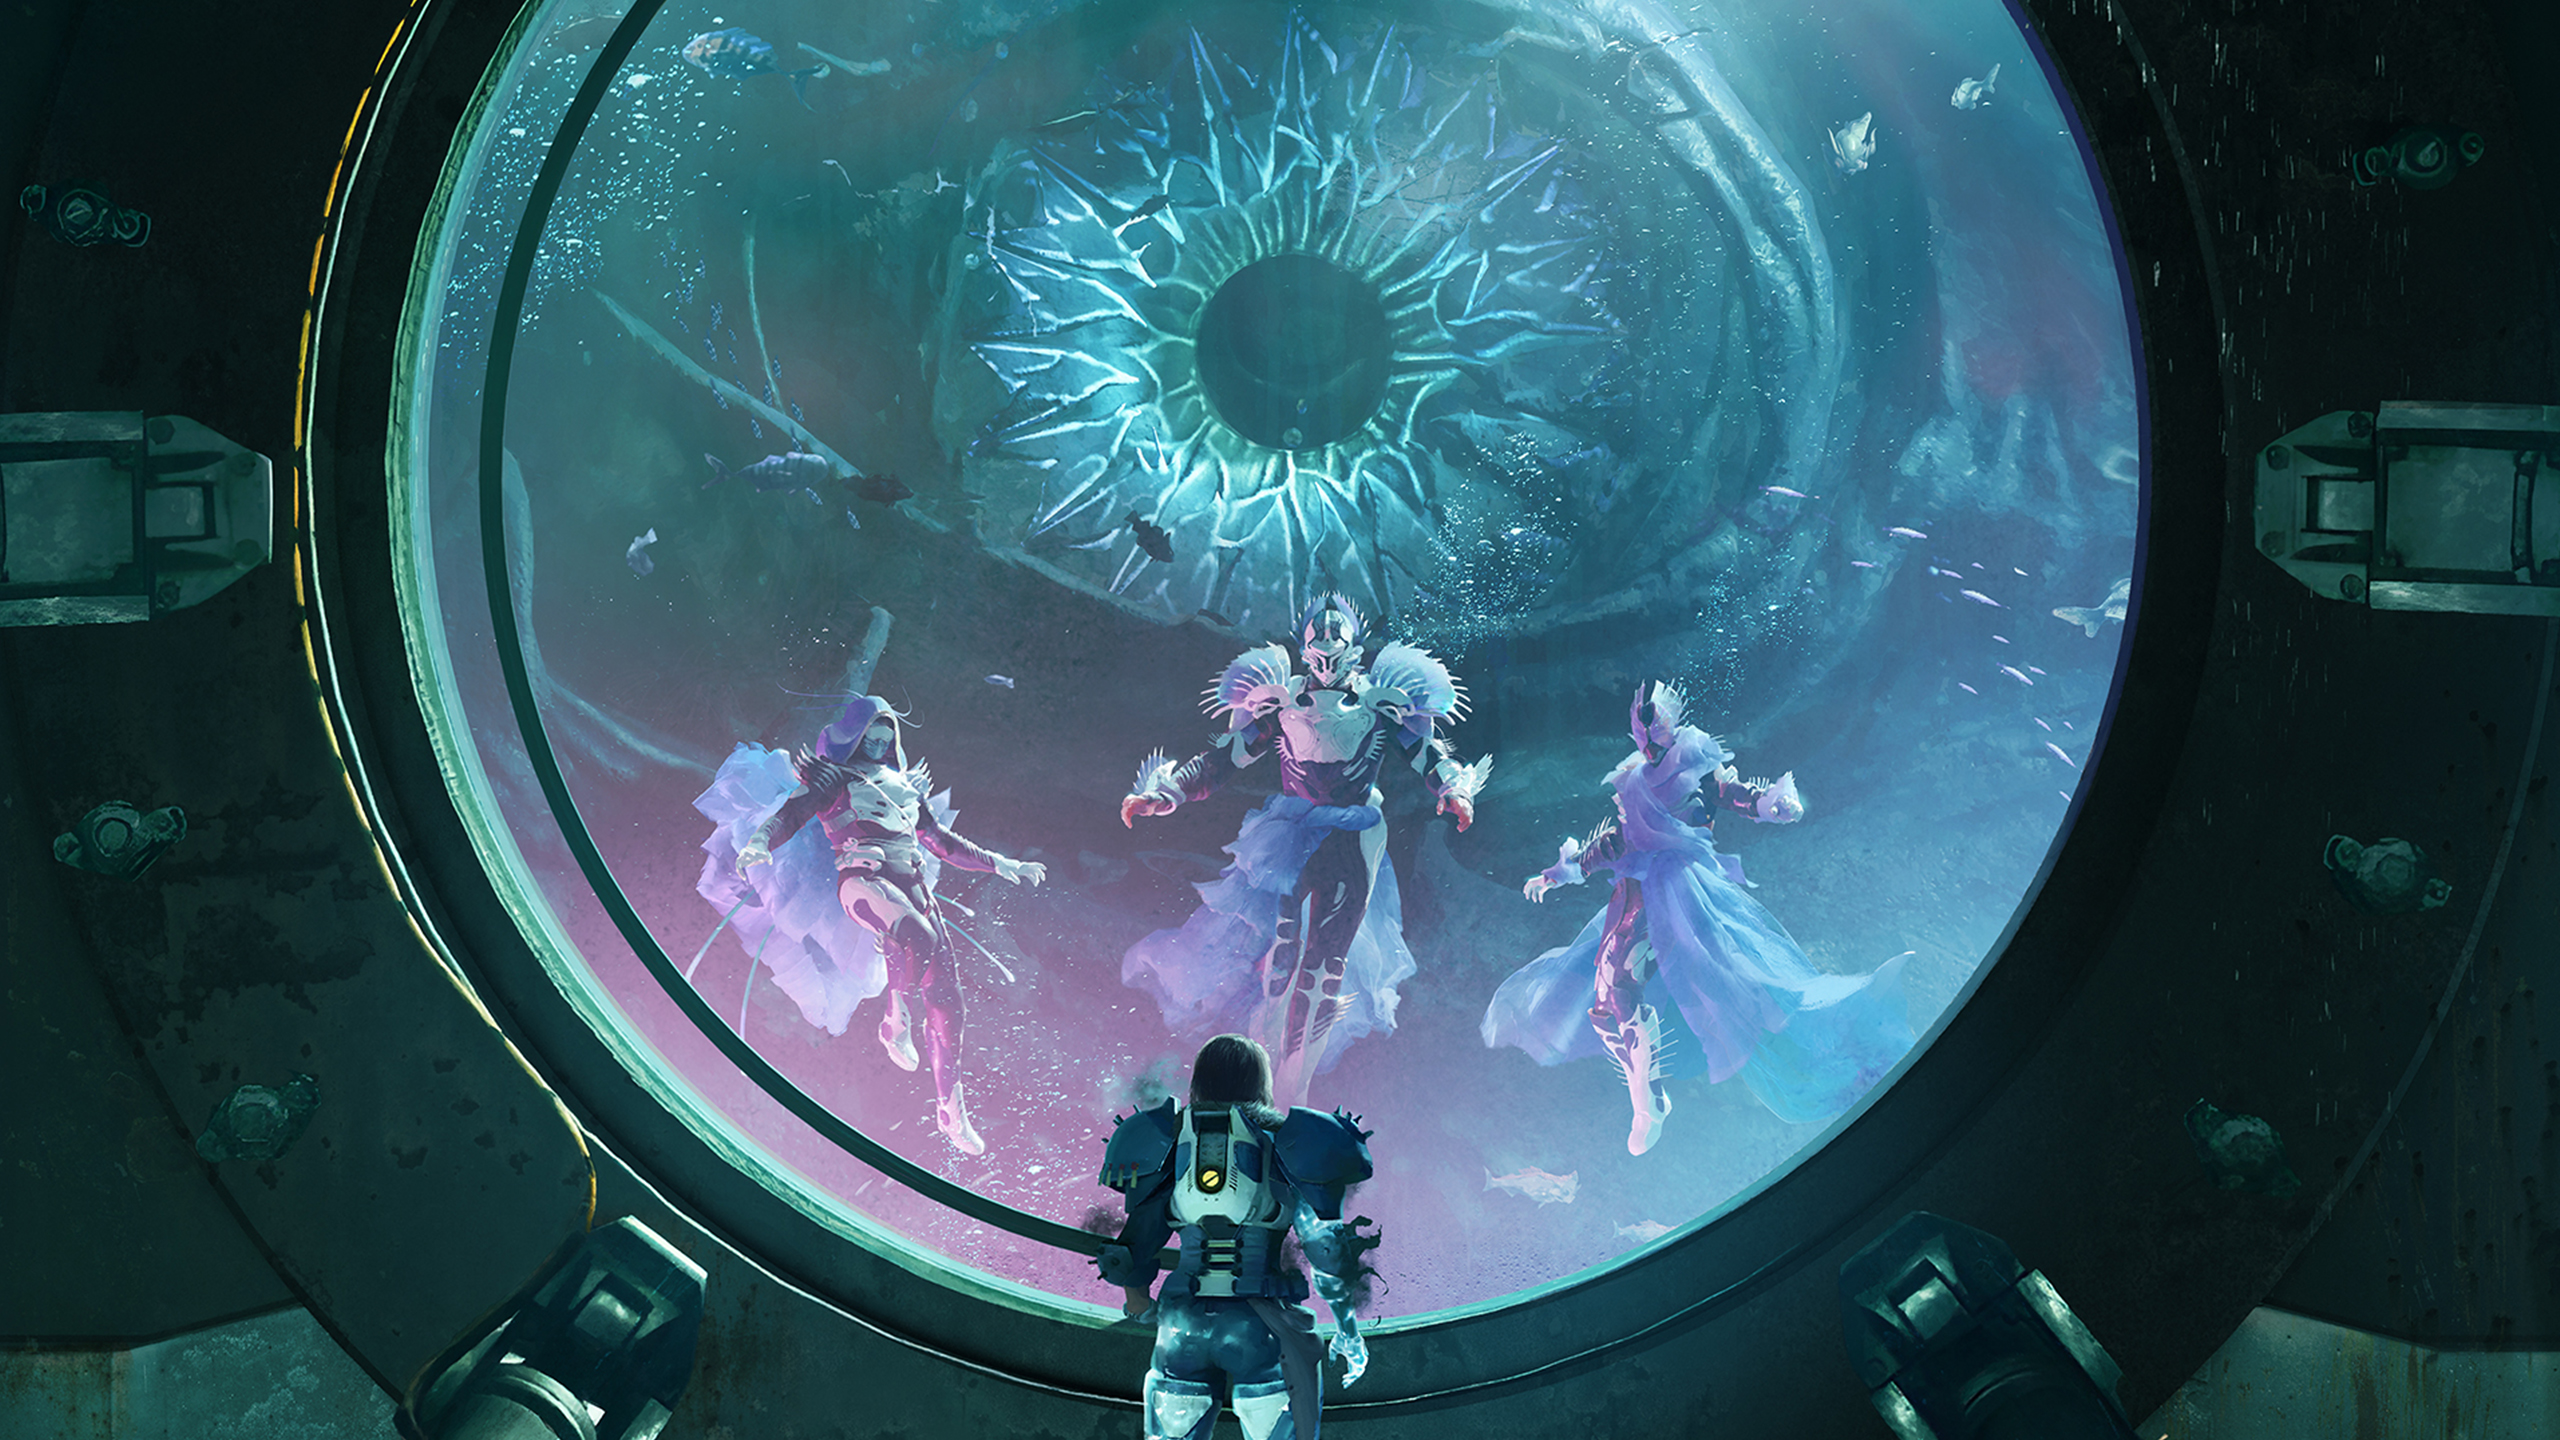 High-definition Destiny 2 wallpaper featuring a scene with characters observing a mysterious cosmic entity through a large circular viewport.